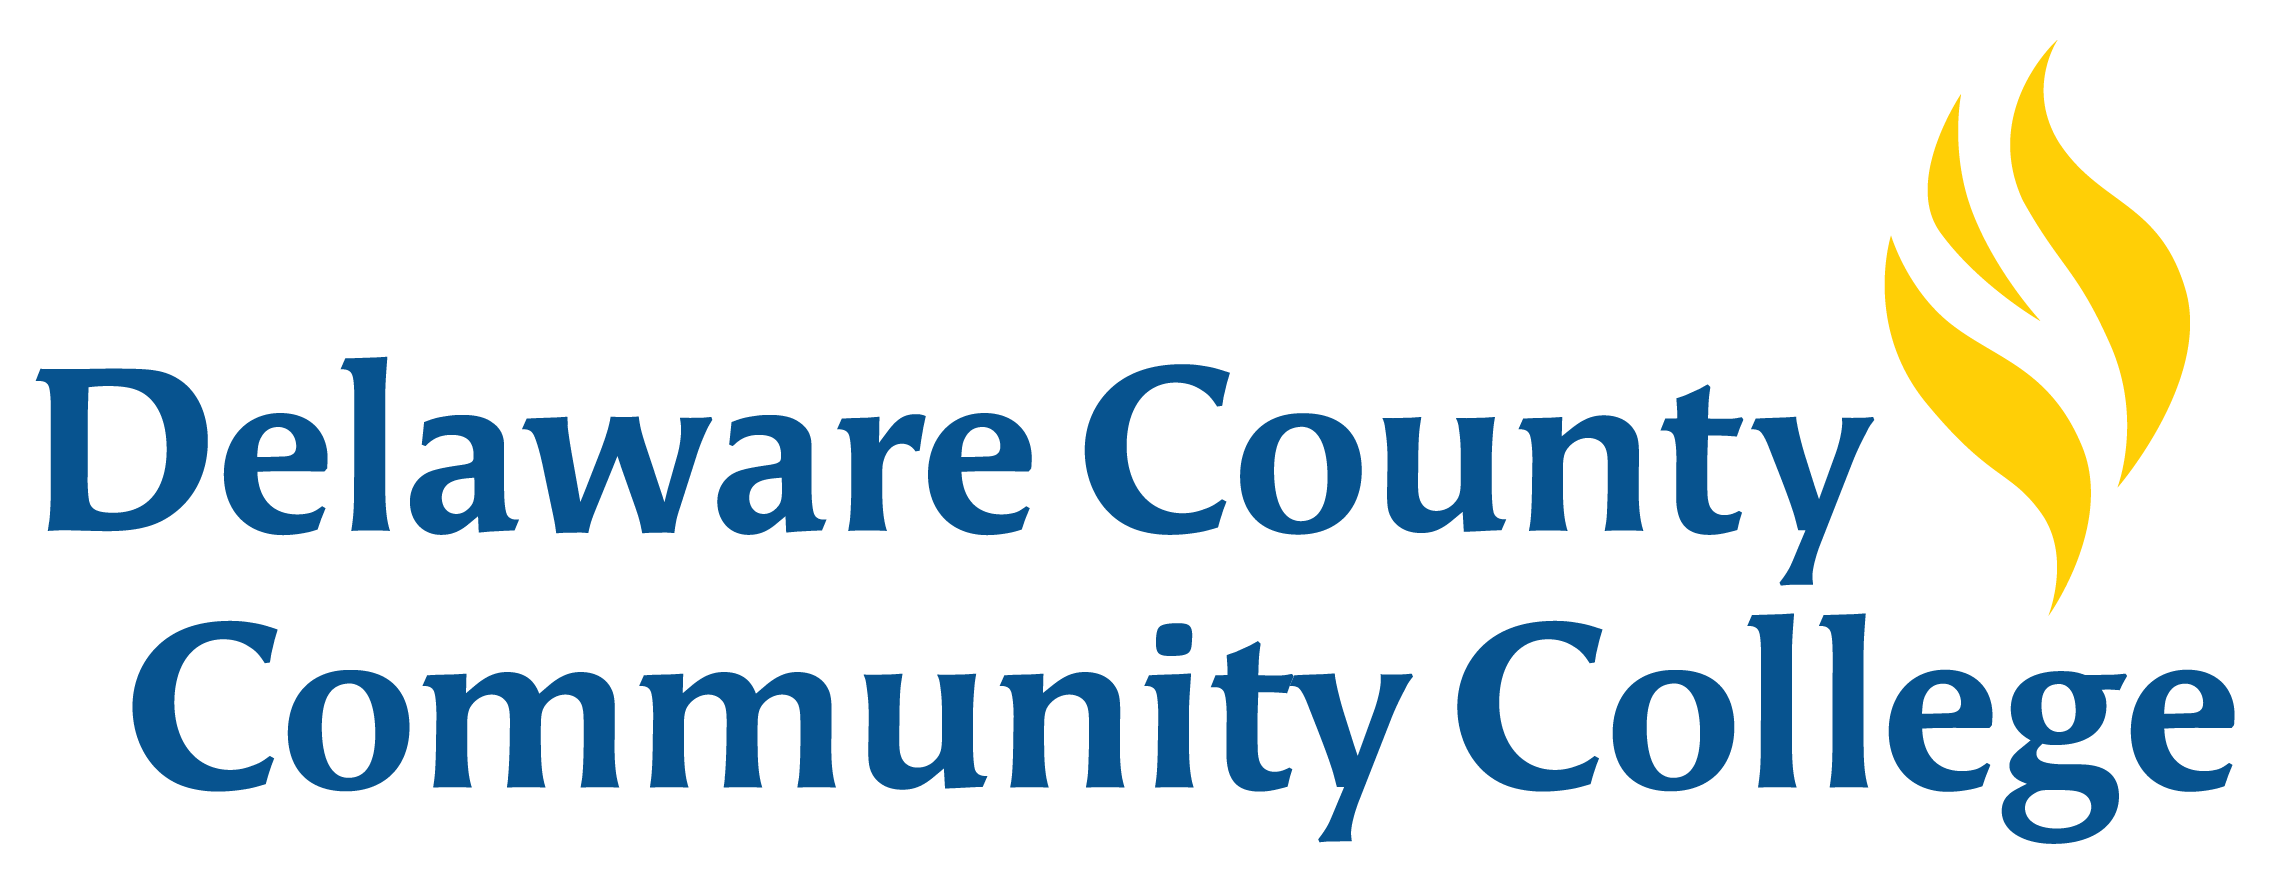 Associate Degree in Game Development | Associate's degree | Computer Science & IT | Blended Learning | 2 years | Delaware County Community College (DCCC) | USA